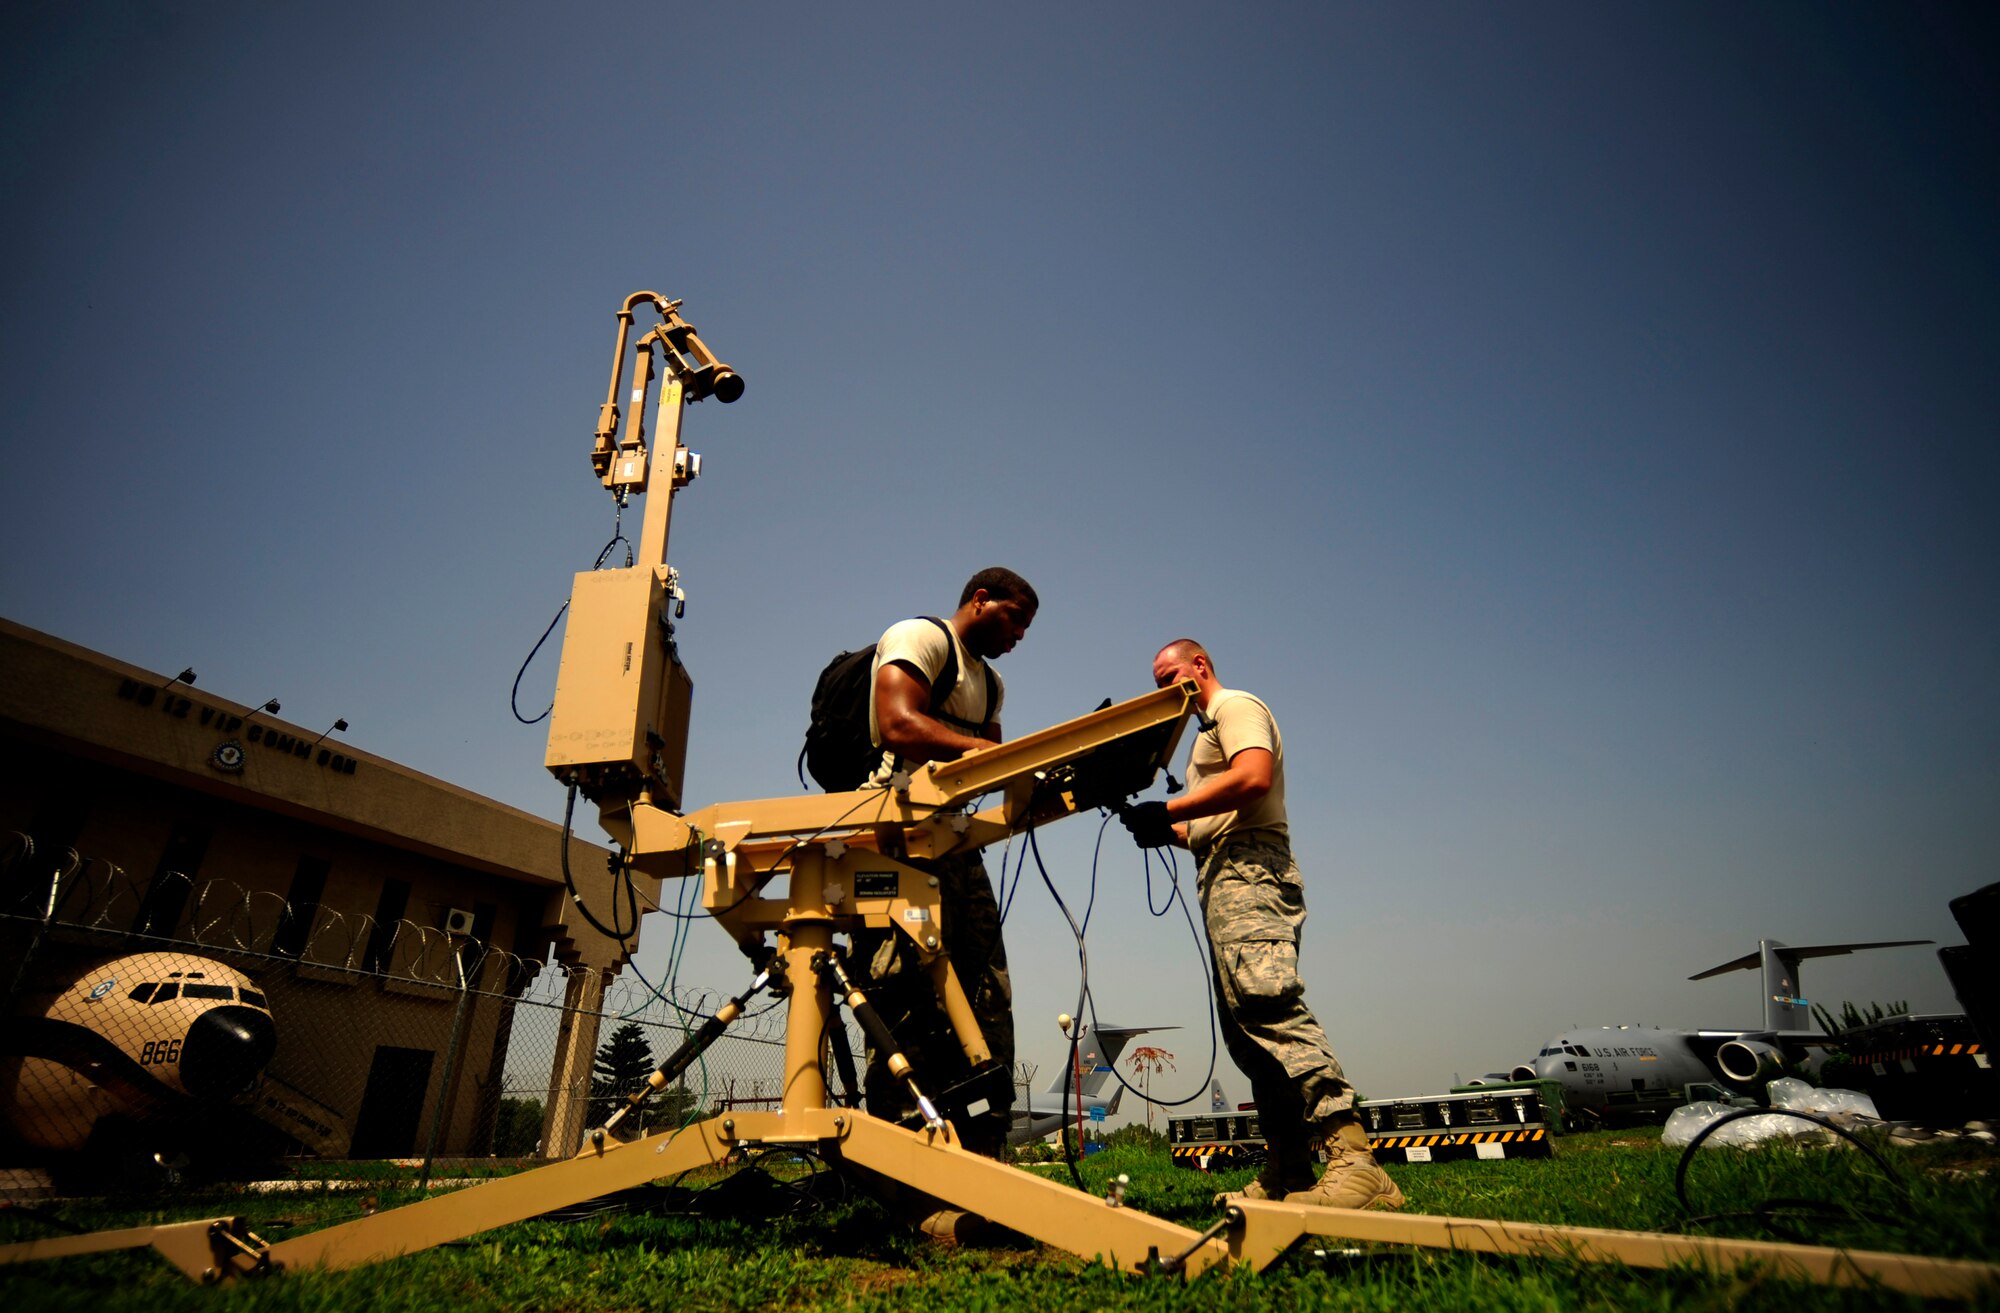 A U.S. Air Force airmen from the Contingency Response Team, 88th CRG McGuire Air Force Base, NJ set up antennas for internet and telephone capabilities during initial CRT build up at Chaklala Air Field, Pakistan on Aug. 28, 2010. The CRT arrived today taking over responsibilities for loading and off loading U.S. aircraft with supplies all over Pakistan in support of flood relief efforts.

(U.S. photo taken by Staff Sgt. Andy M. Kin)